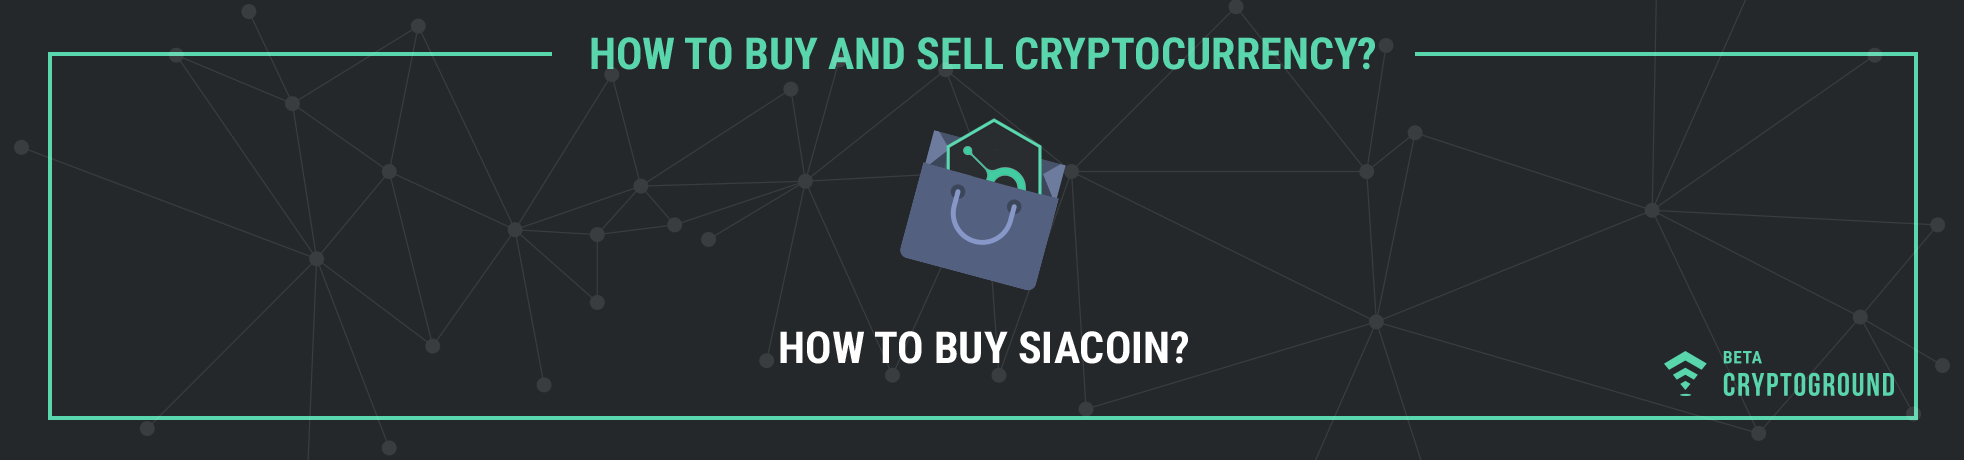 How to Buy SiaCoin?